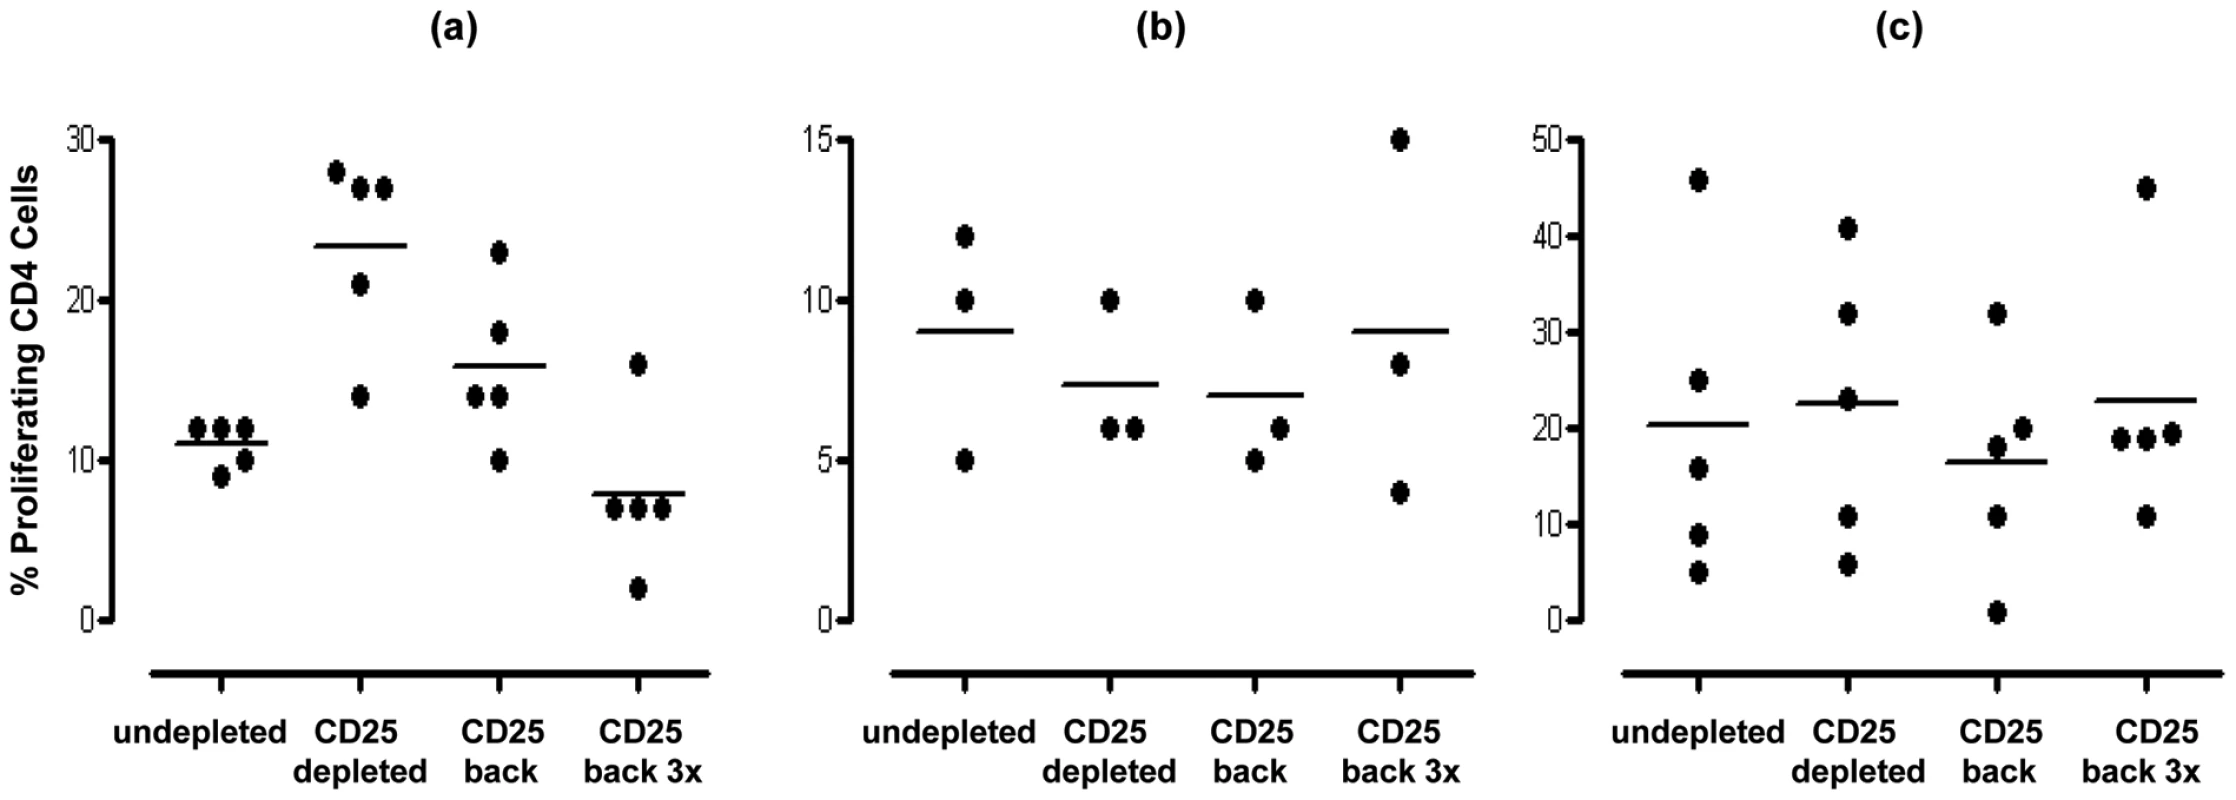 Effect of restoration/addition of Tregs (CD25<sup>hi</sup>) cells back into CD25<sup>hi</sup> cell depleted MNC samples on proliferative responses by pneumococcal specific CD4<sup>+</sup> T cells.